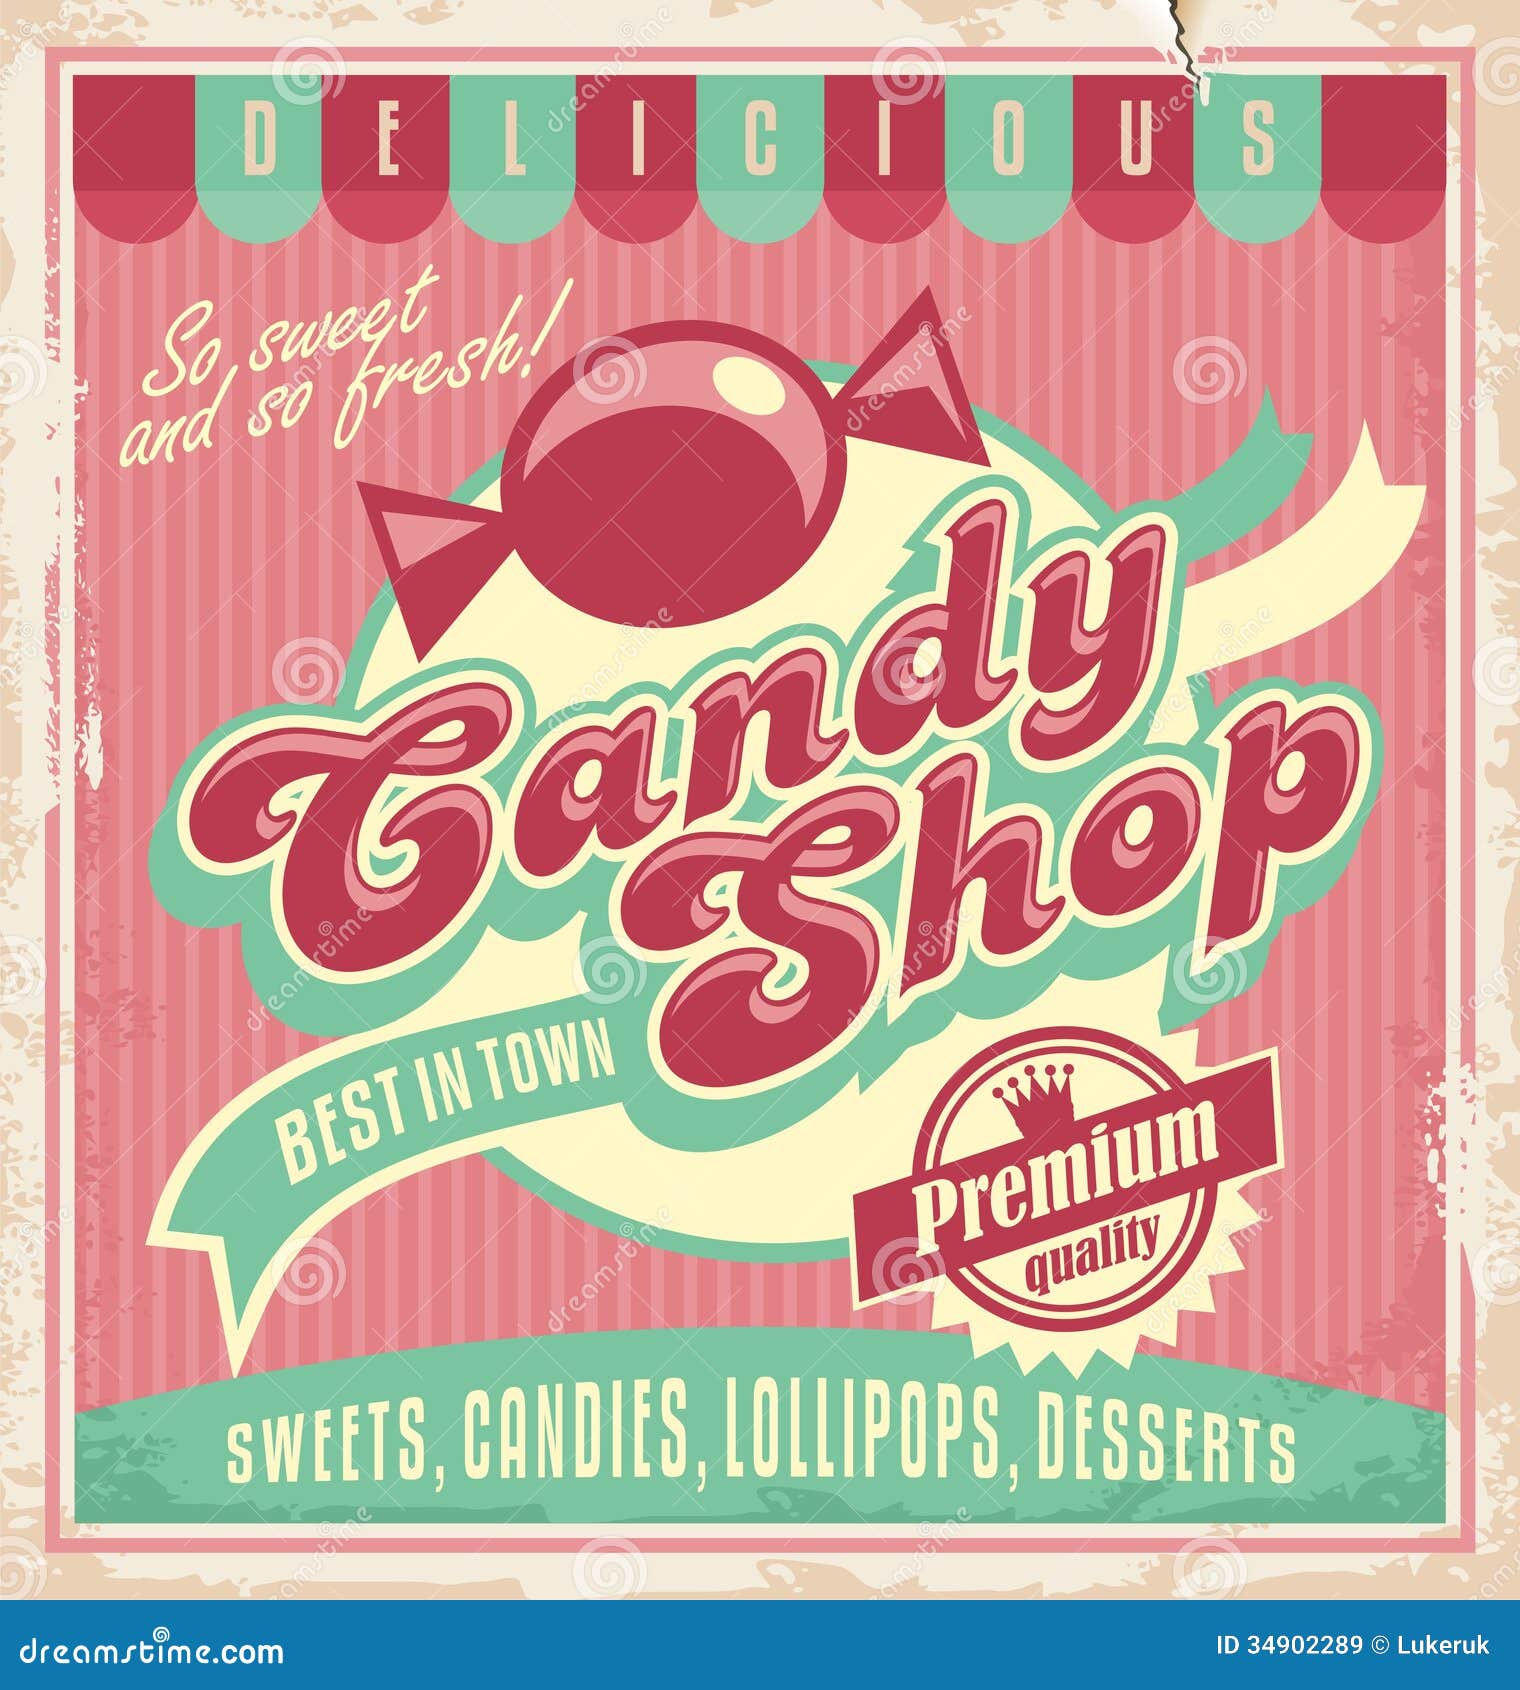 vintage poster template for candy shop.